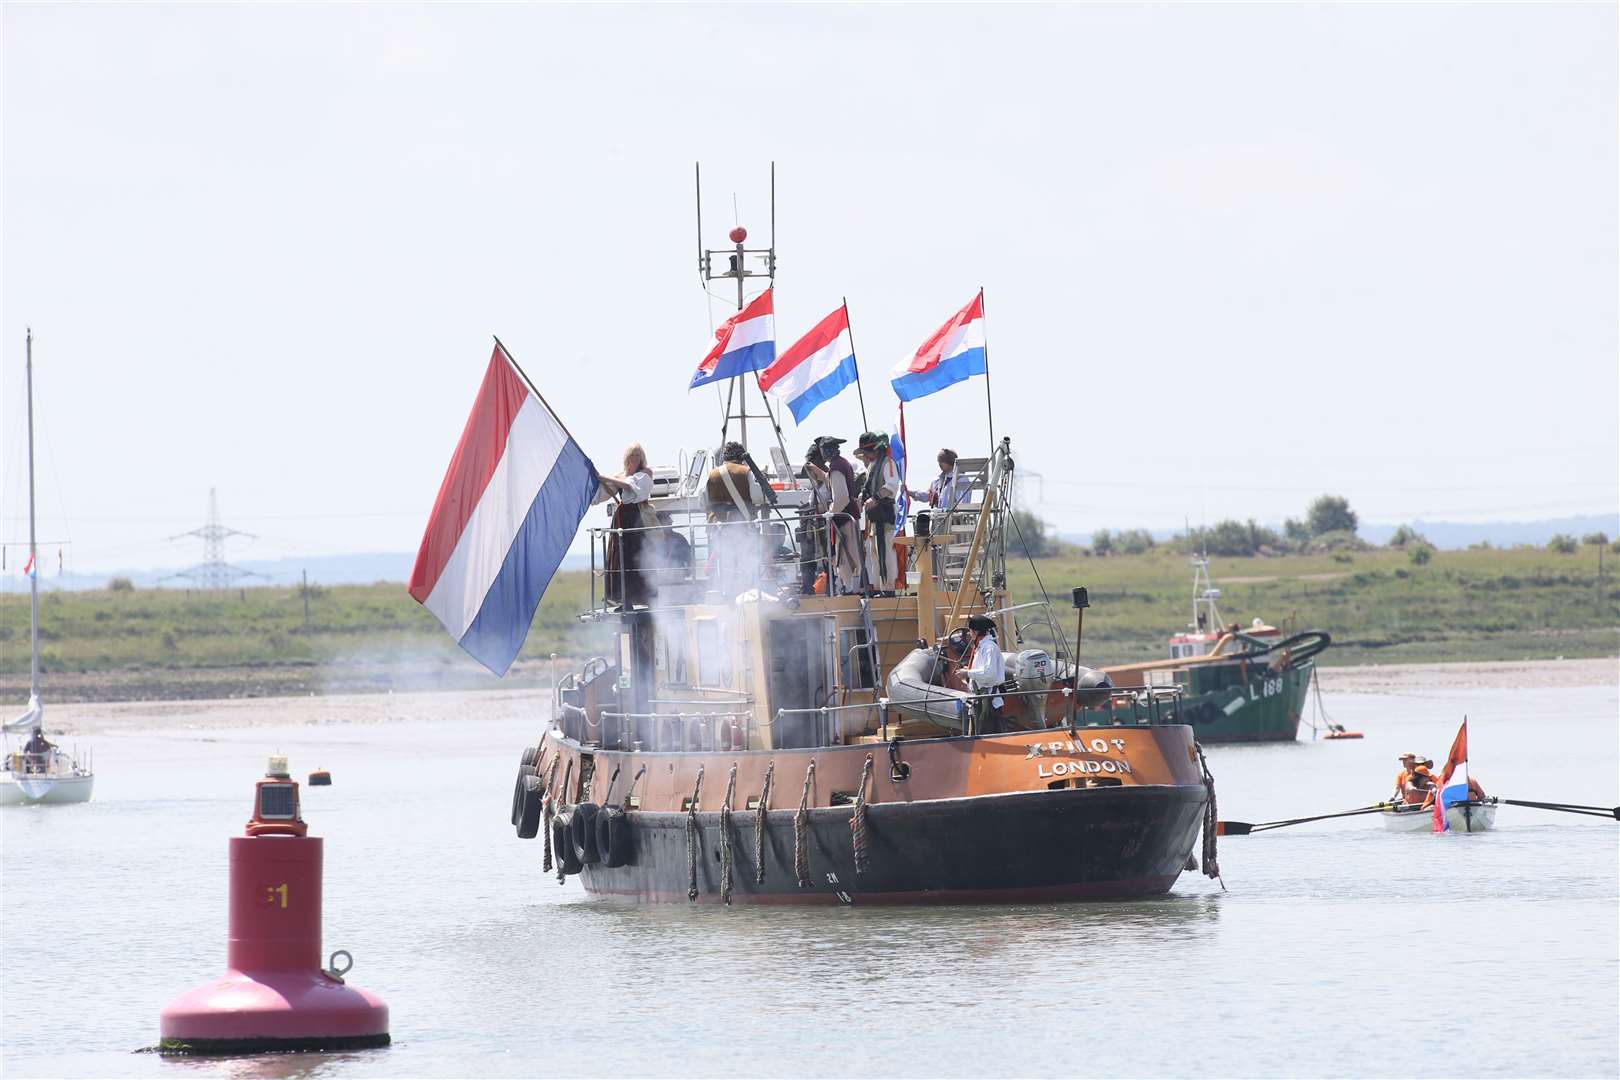 Sheppey Pirates, with Dutch flags flying, re-enact a part of the Dutch flotilla invading Queenborough during the 50th Anniversary of the Official handing back of Queenborough by the Dutch. Picture: John Westhrop